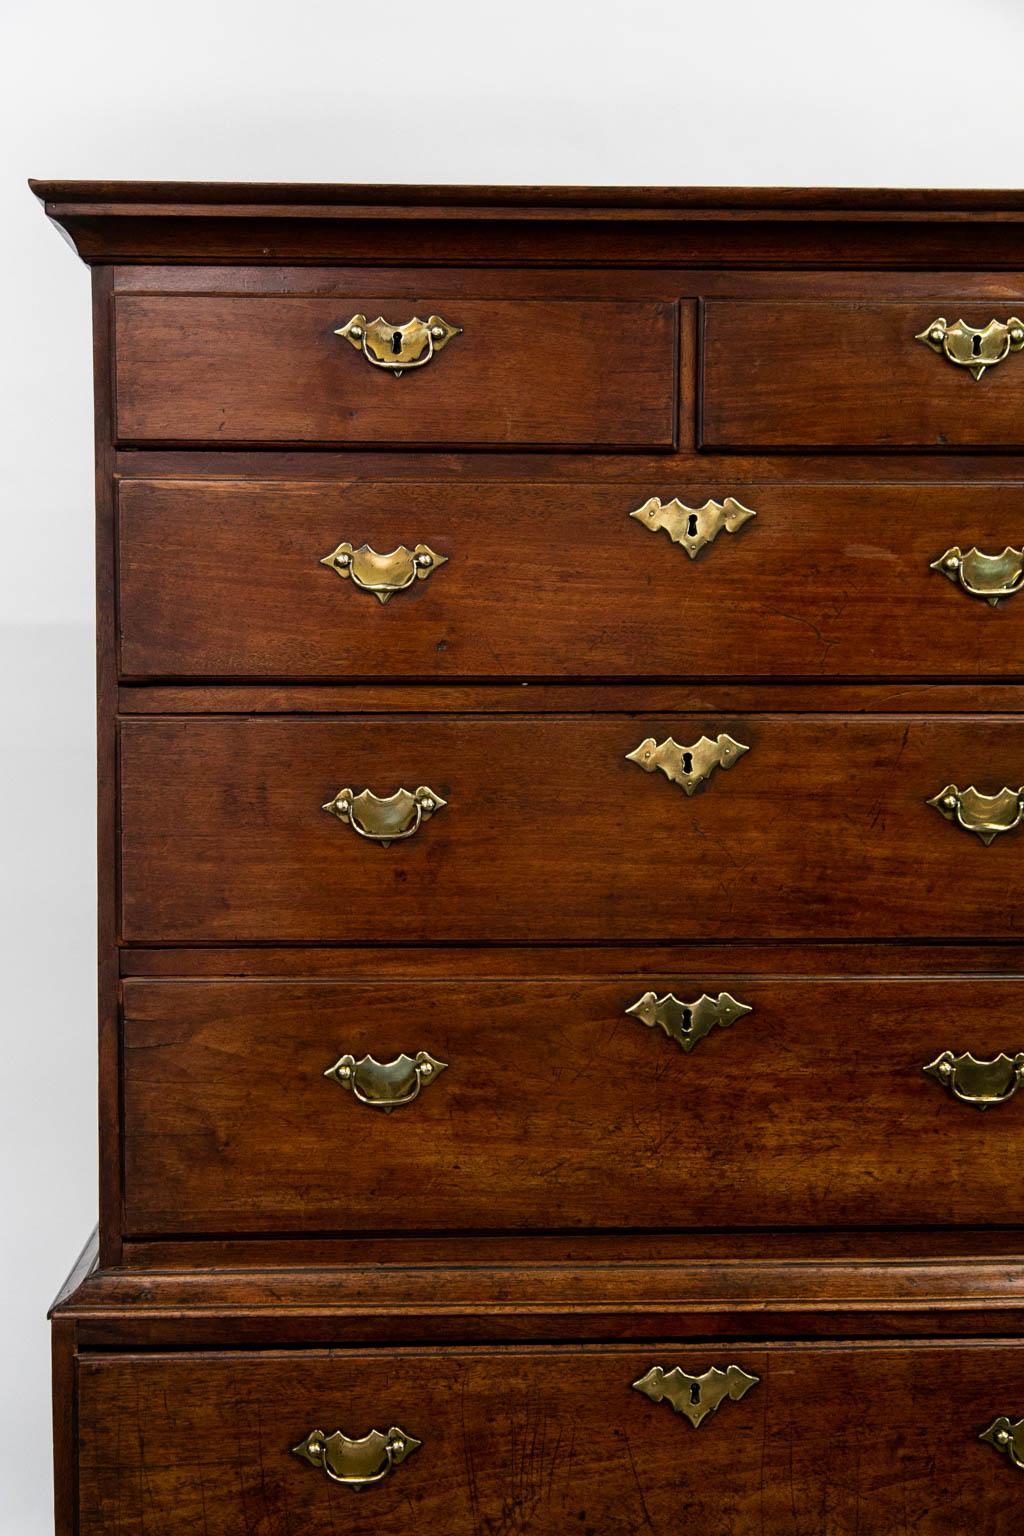 This English highboy is in its original condition including the brasses and finish. The drawers have thumb nail moldings. The lower section has a scalloped apron that joins cabriole legs terminating in pad feet.